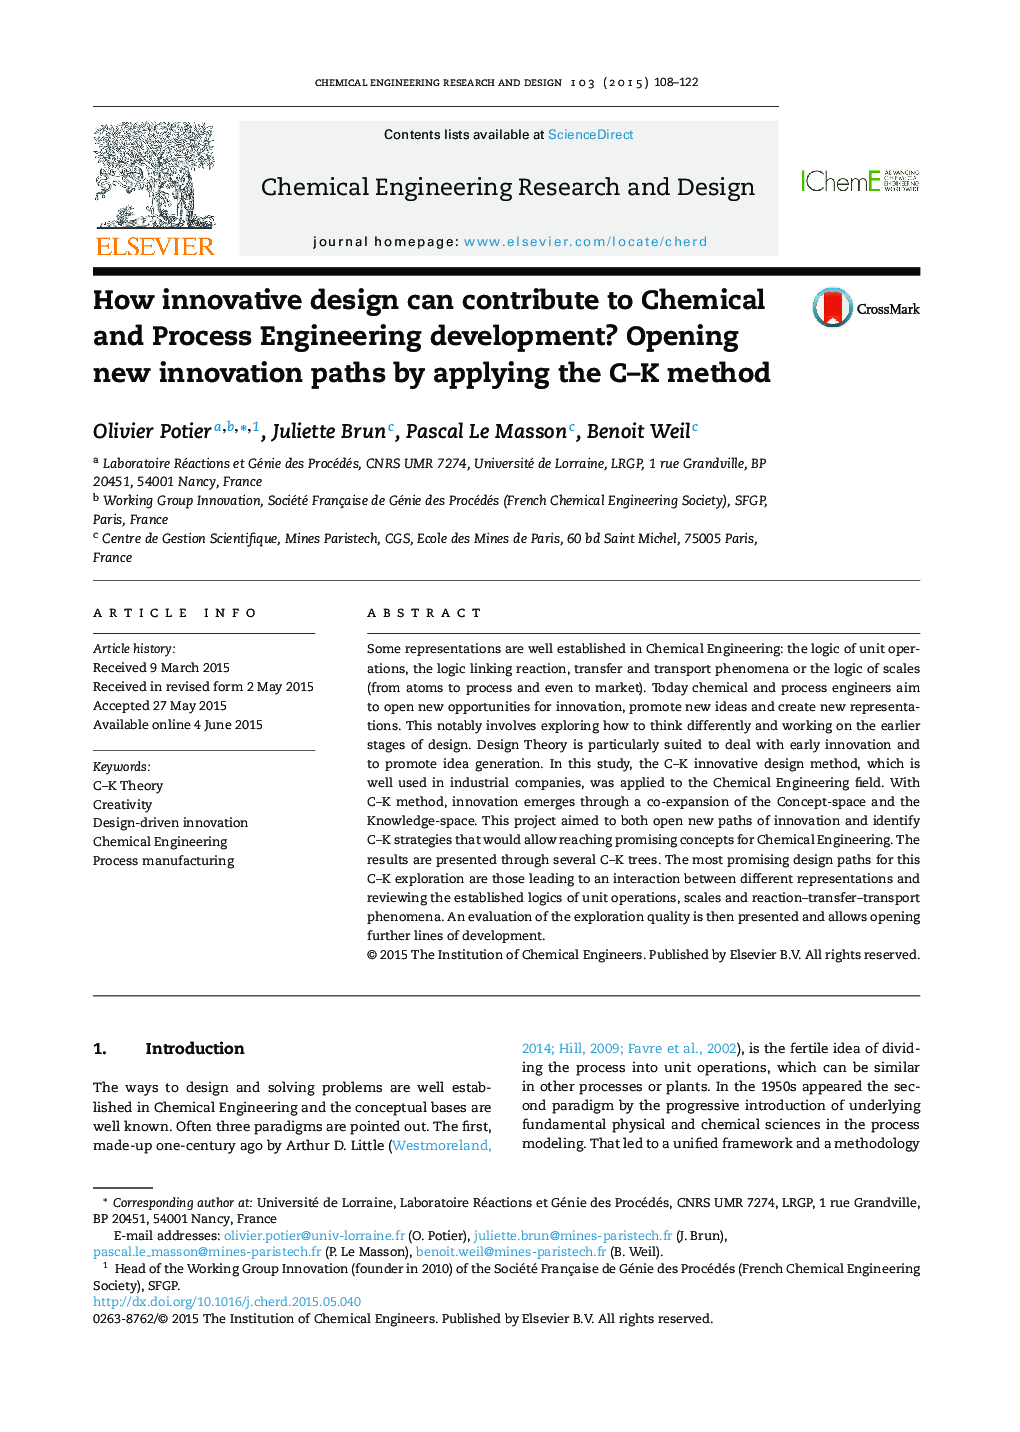 How innovative design can contribute to Chemical and Process Engineering development? Opening new innovation paths by applying the C–K method